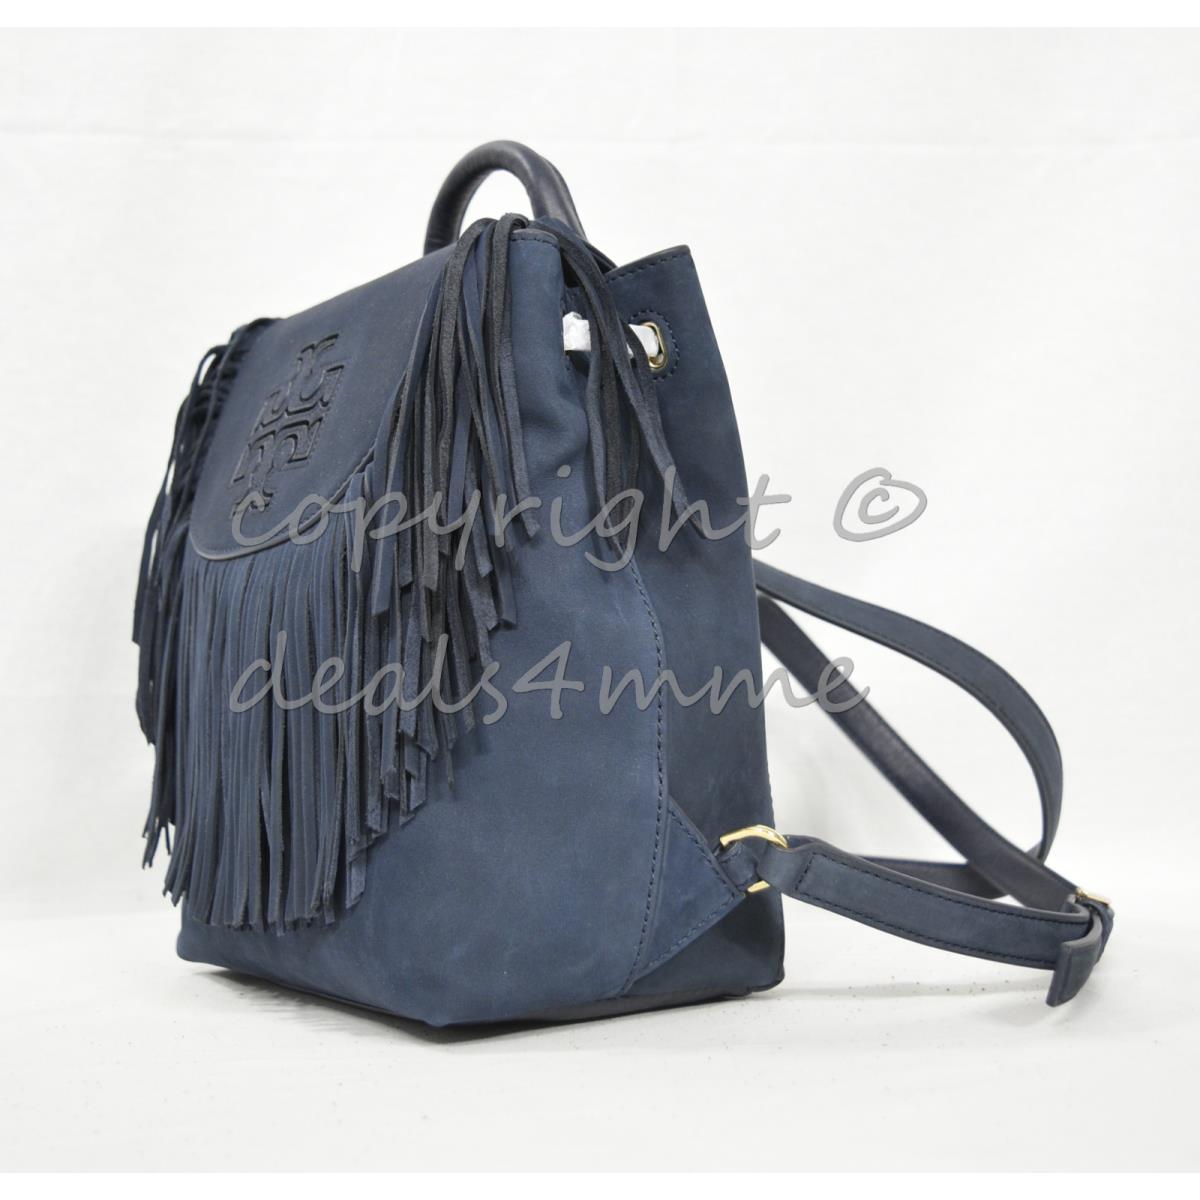 Tory Burch Harper Fringe Suede Mini Backpack in Otter Brown or Tory Navy